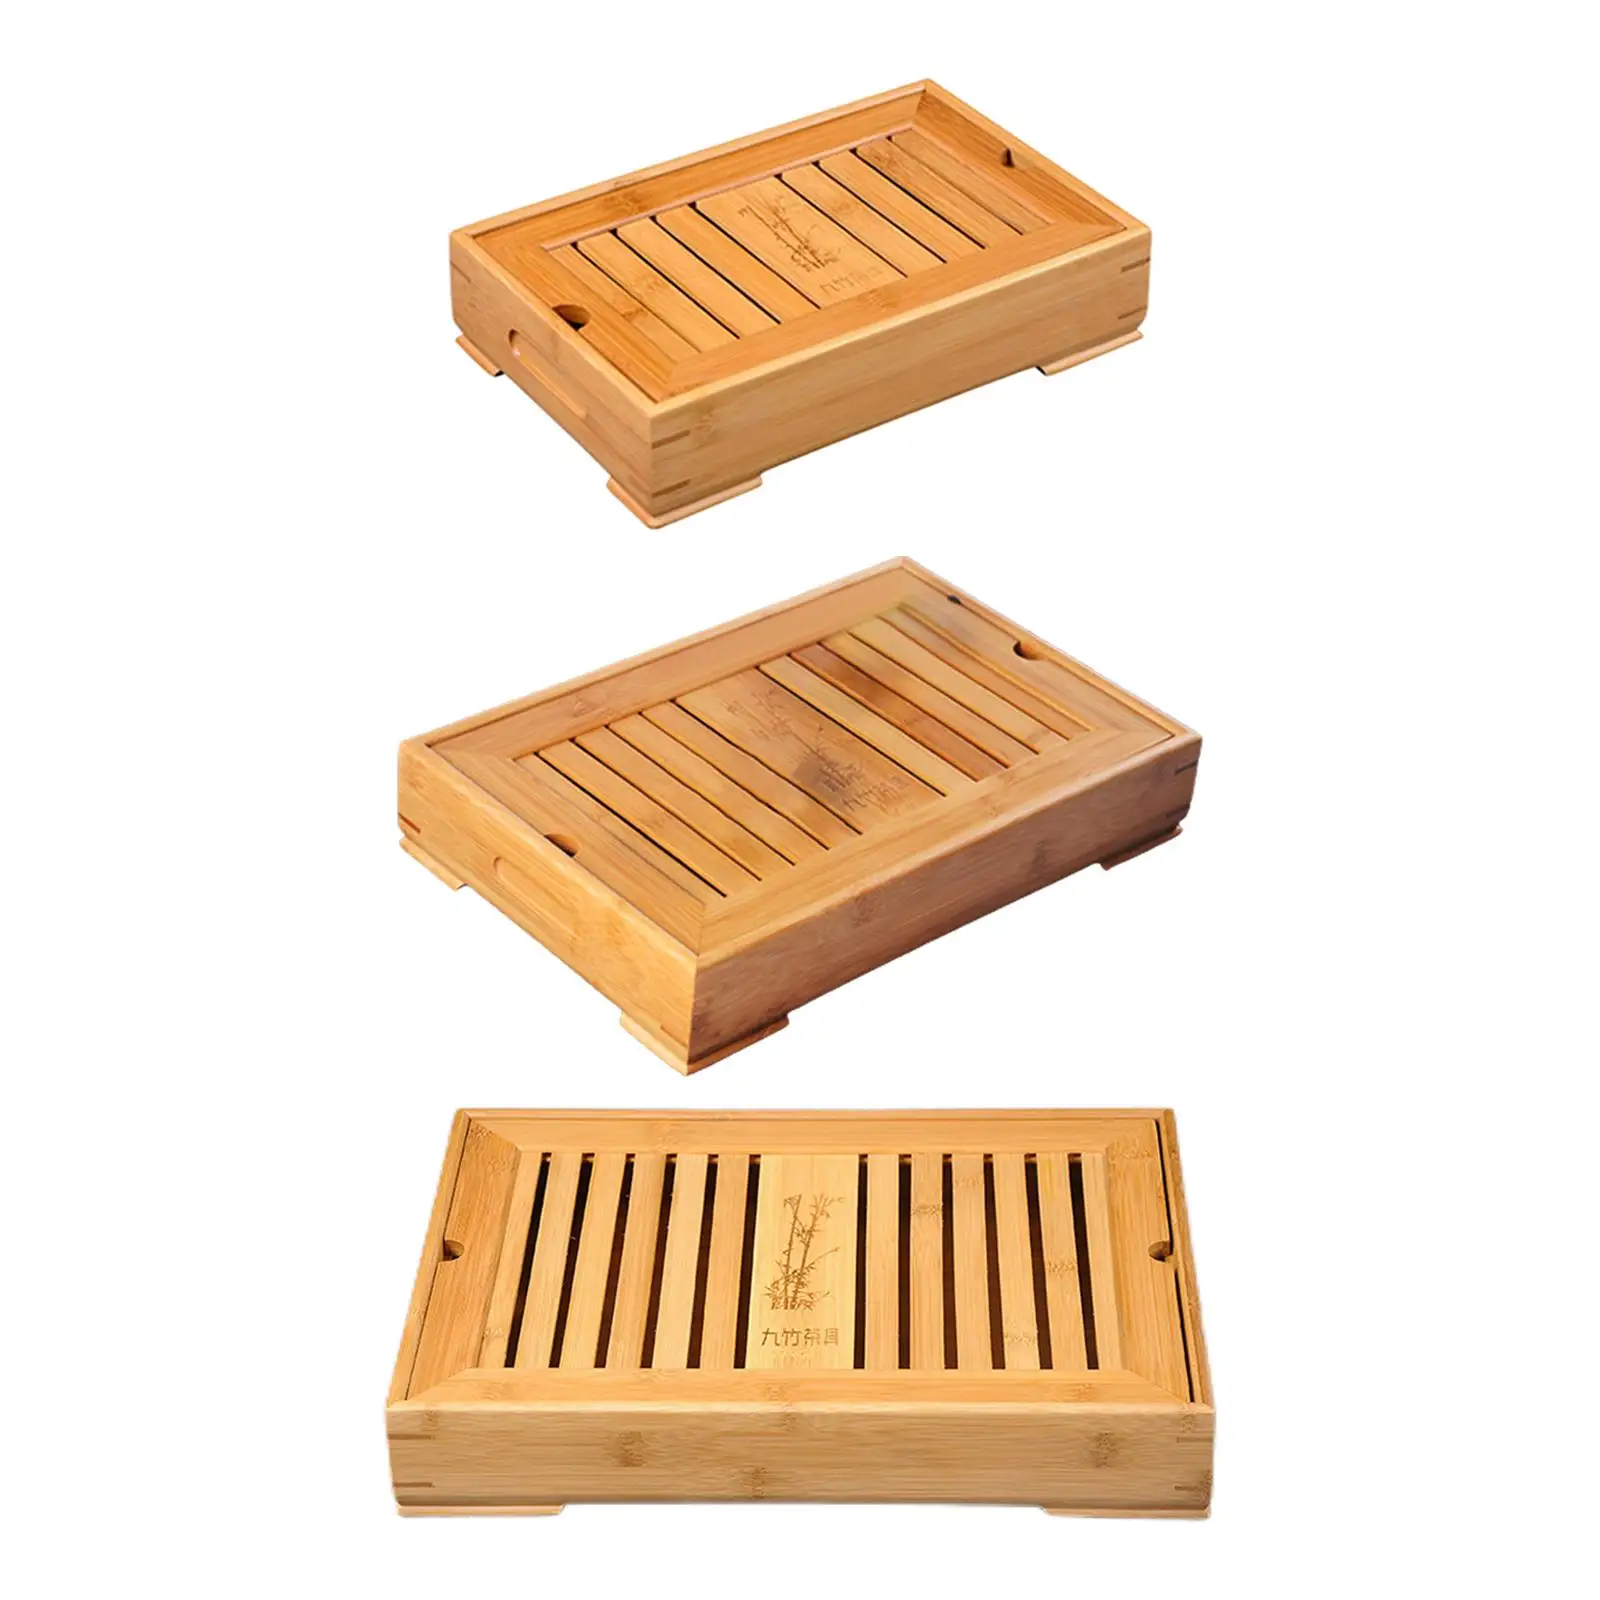 Bamboo Chinese Gongfu Tea Tray Serving Platter Hollow Design Storage for Novelty Gifts